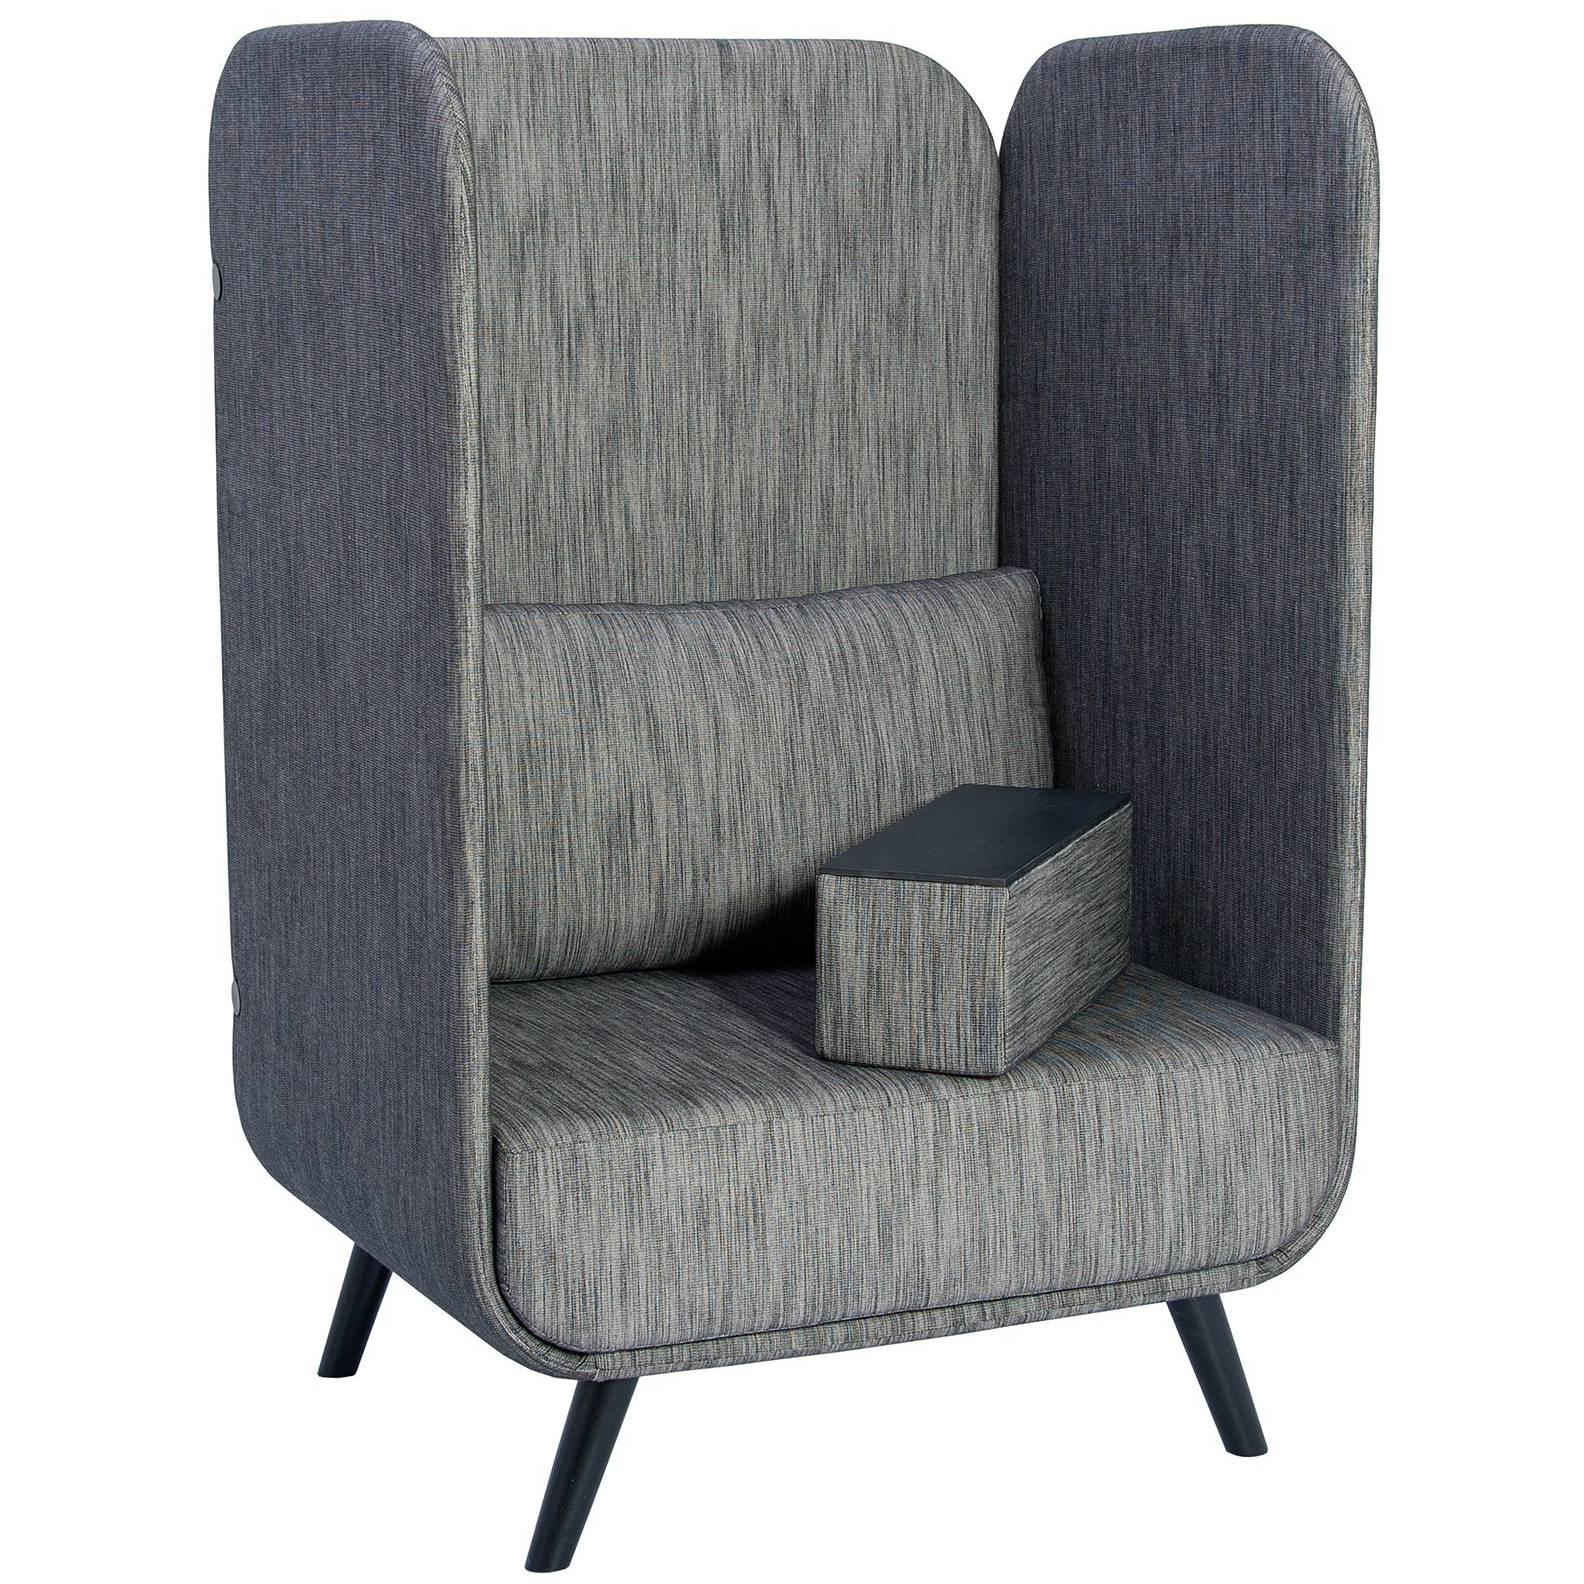 Casulo Brazilian Contemporary Upholstered Easychair by Lattoog